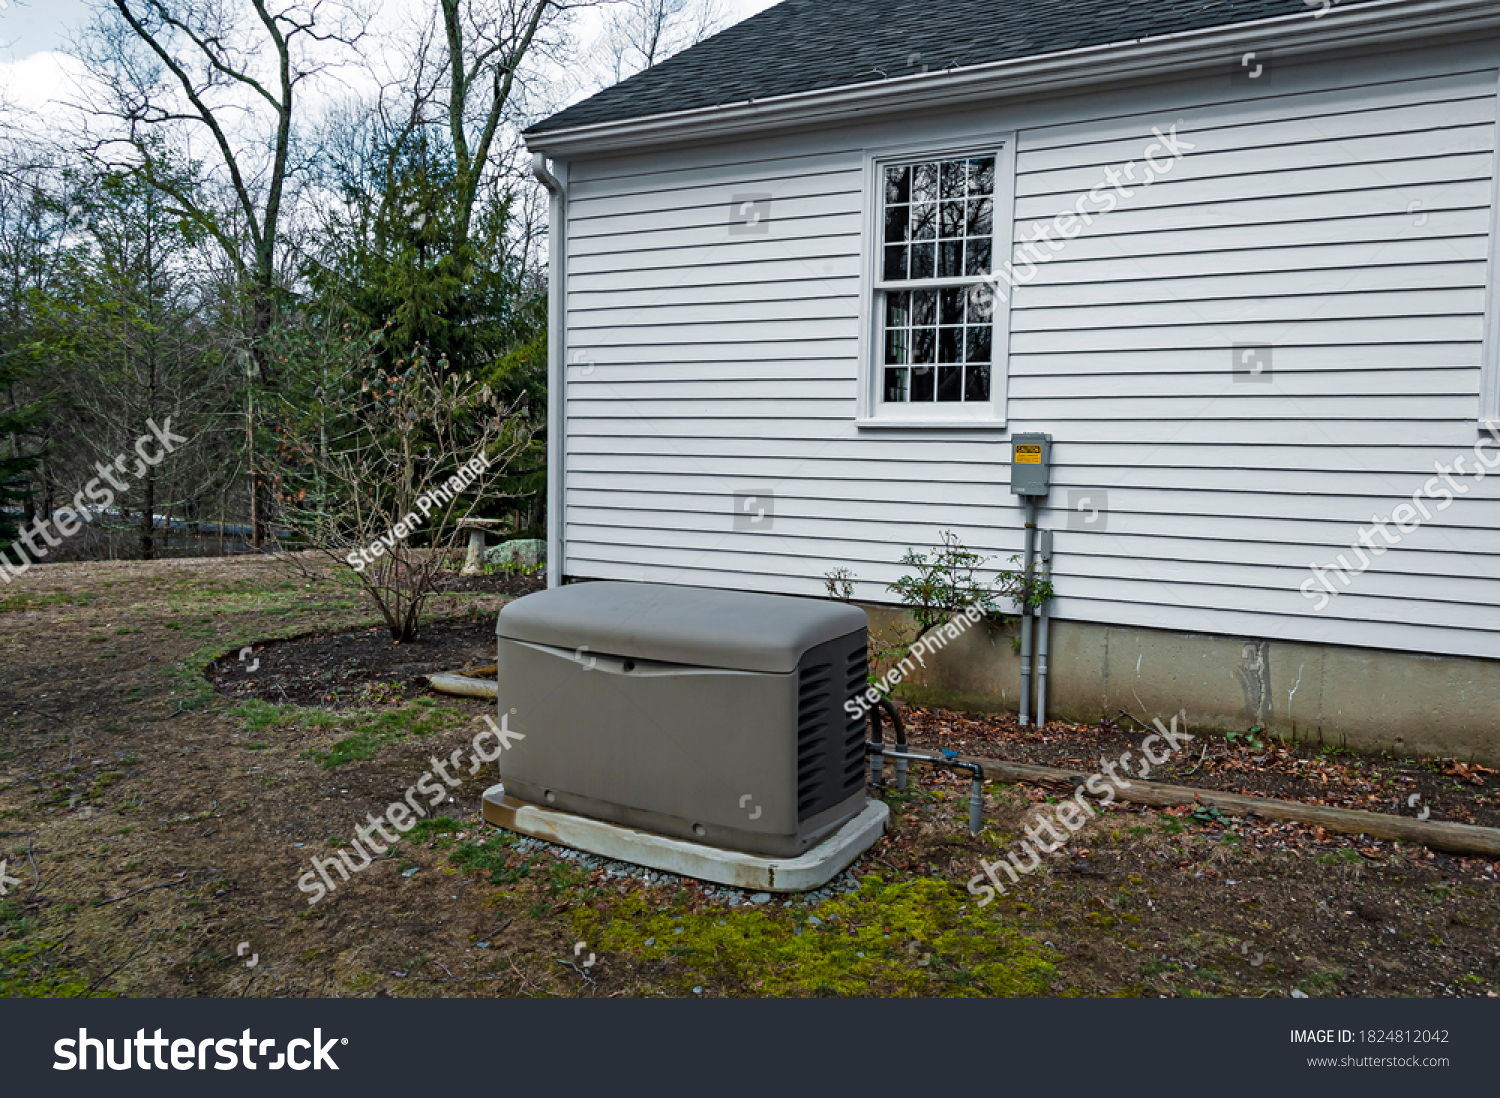 Residential standby generator installed on a concrete pad #1824812042